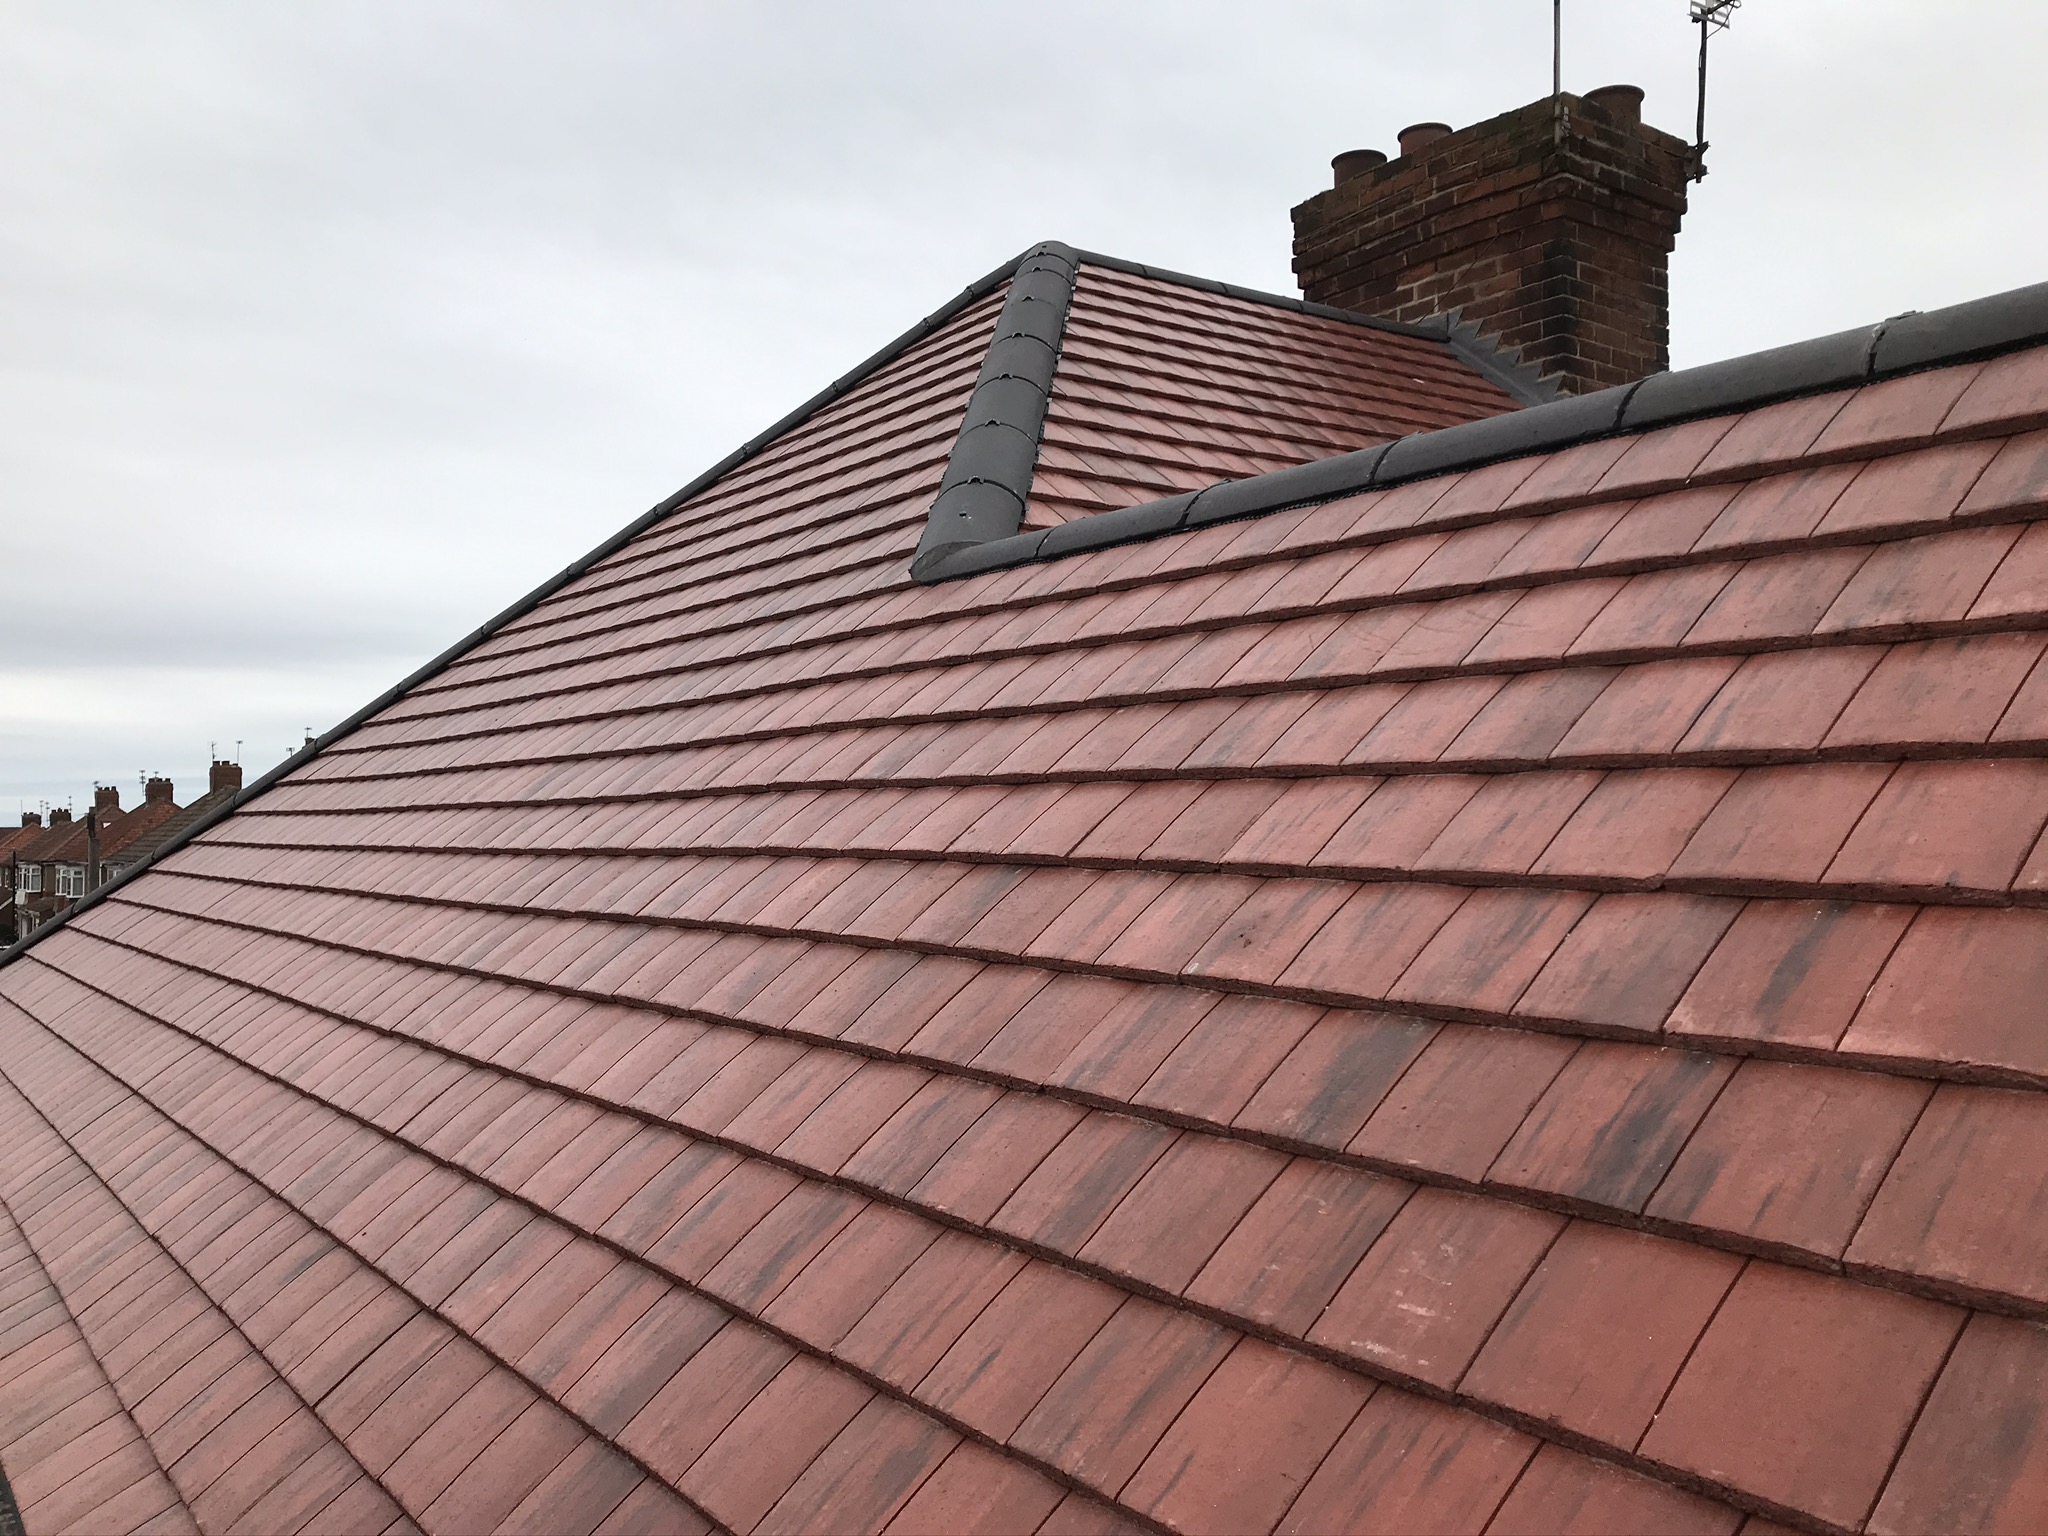 Main photo for MICHAEL COOKSON ROOFING